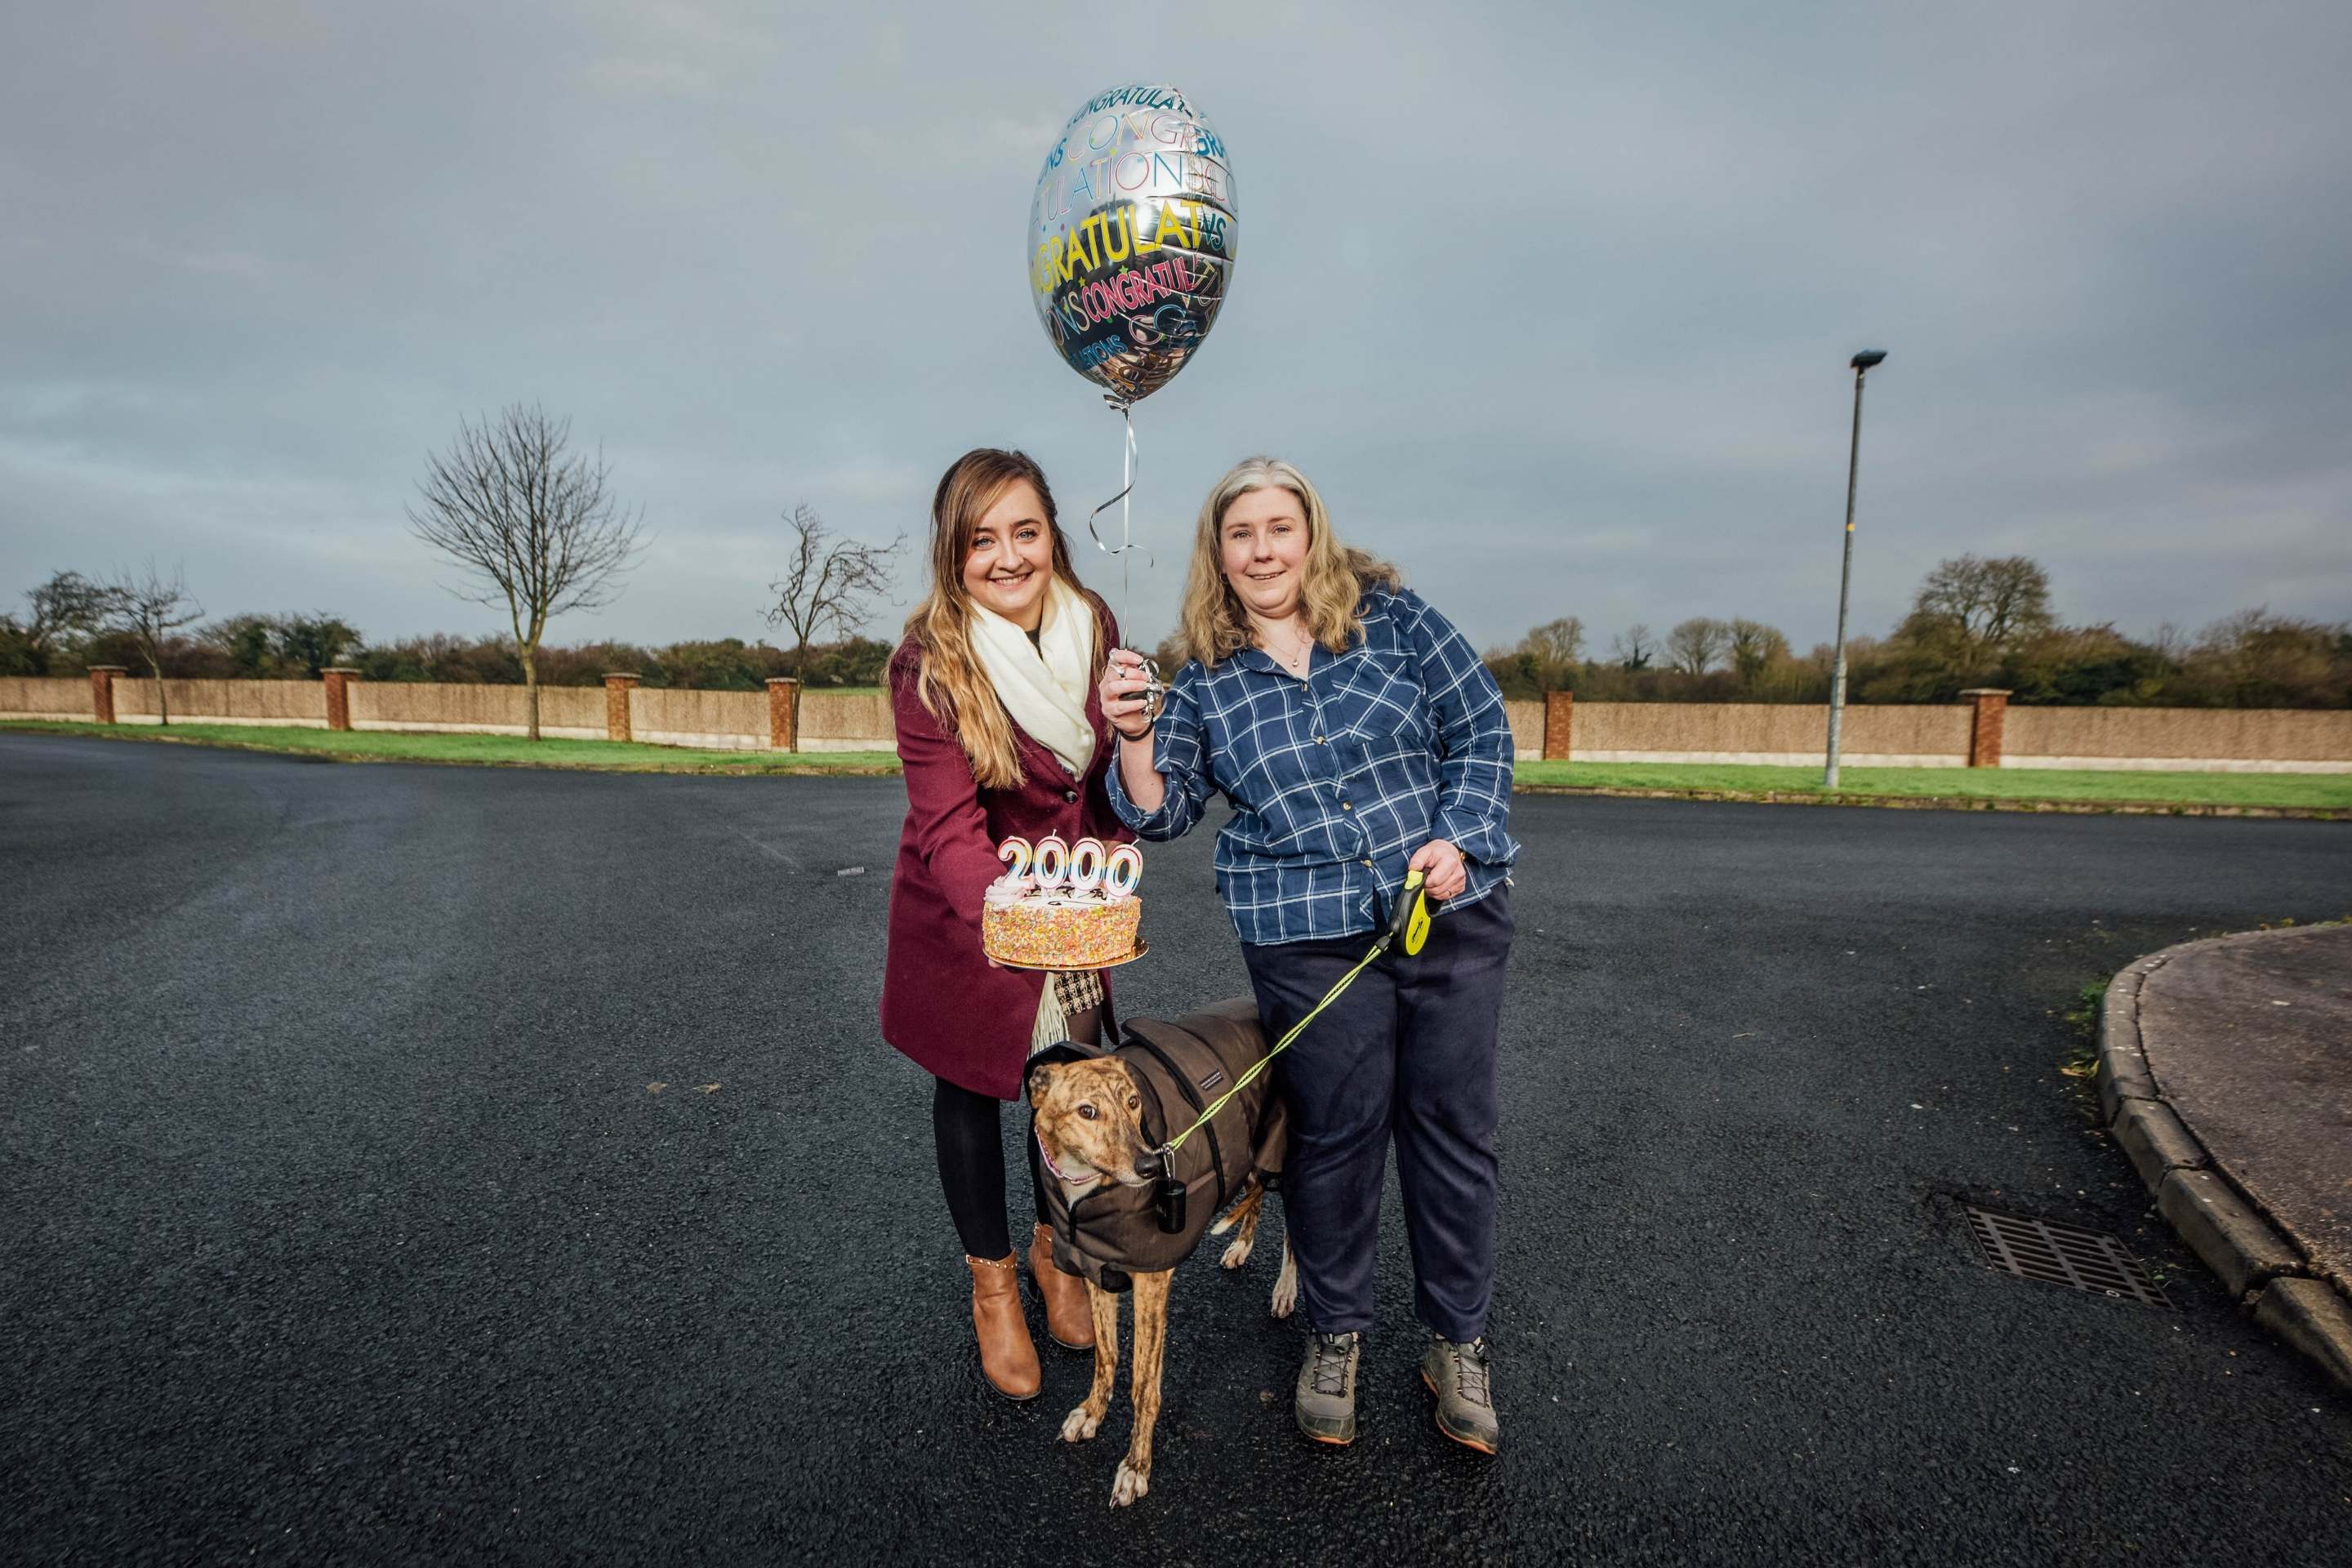 Joanne Murray (GRI) and Catherine Smith with Rosie the 200th greyhound adopted through the Irish Retired Greyhound Trust.